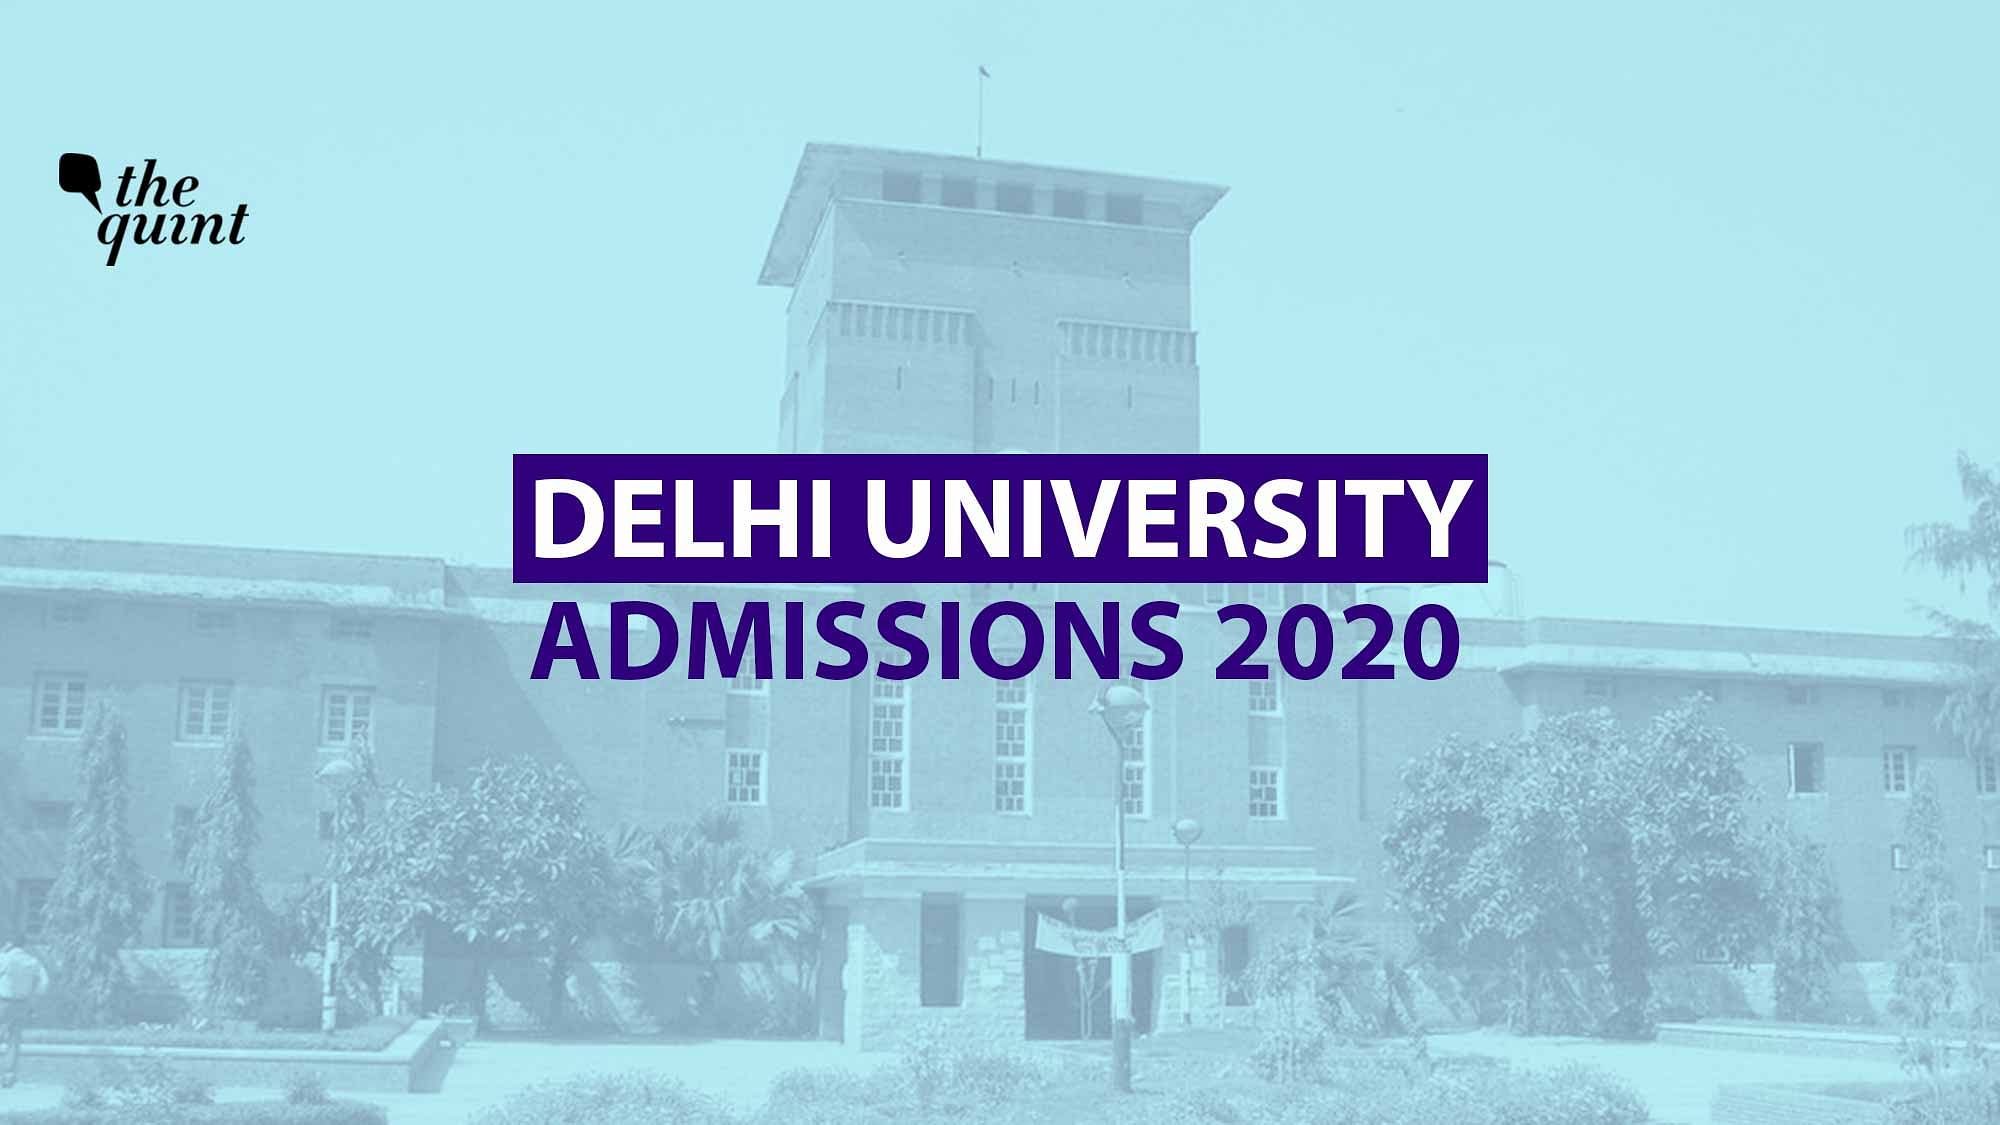 DU Admission 2020: With just over 70,000 seats available for undergraduate admission at the premier university, not all of the 3.5 lakhs student who registered for admission are likely to secure admission.